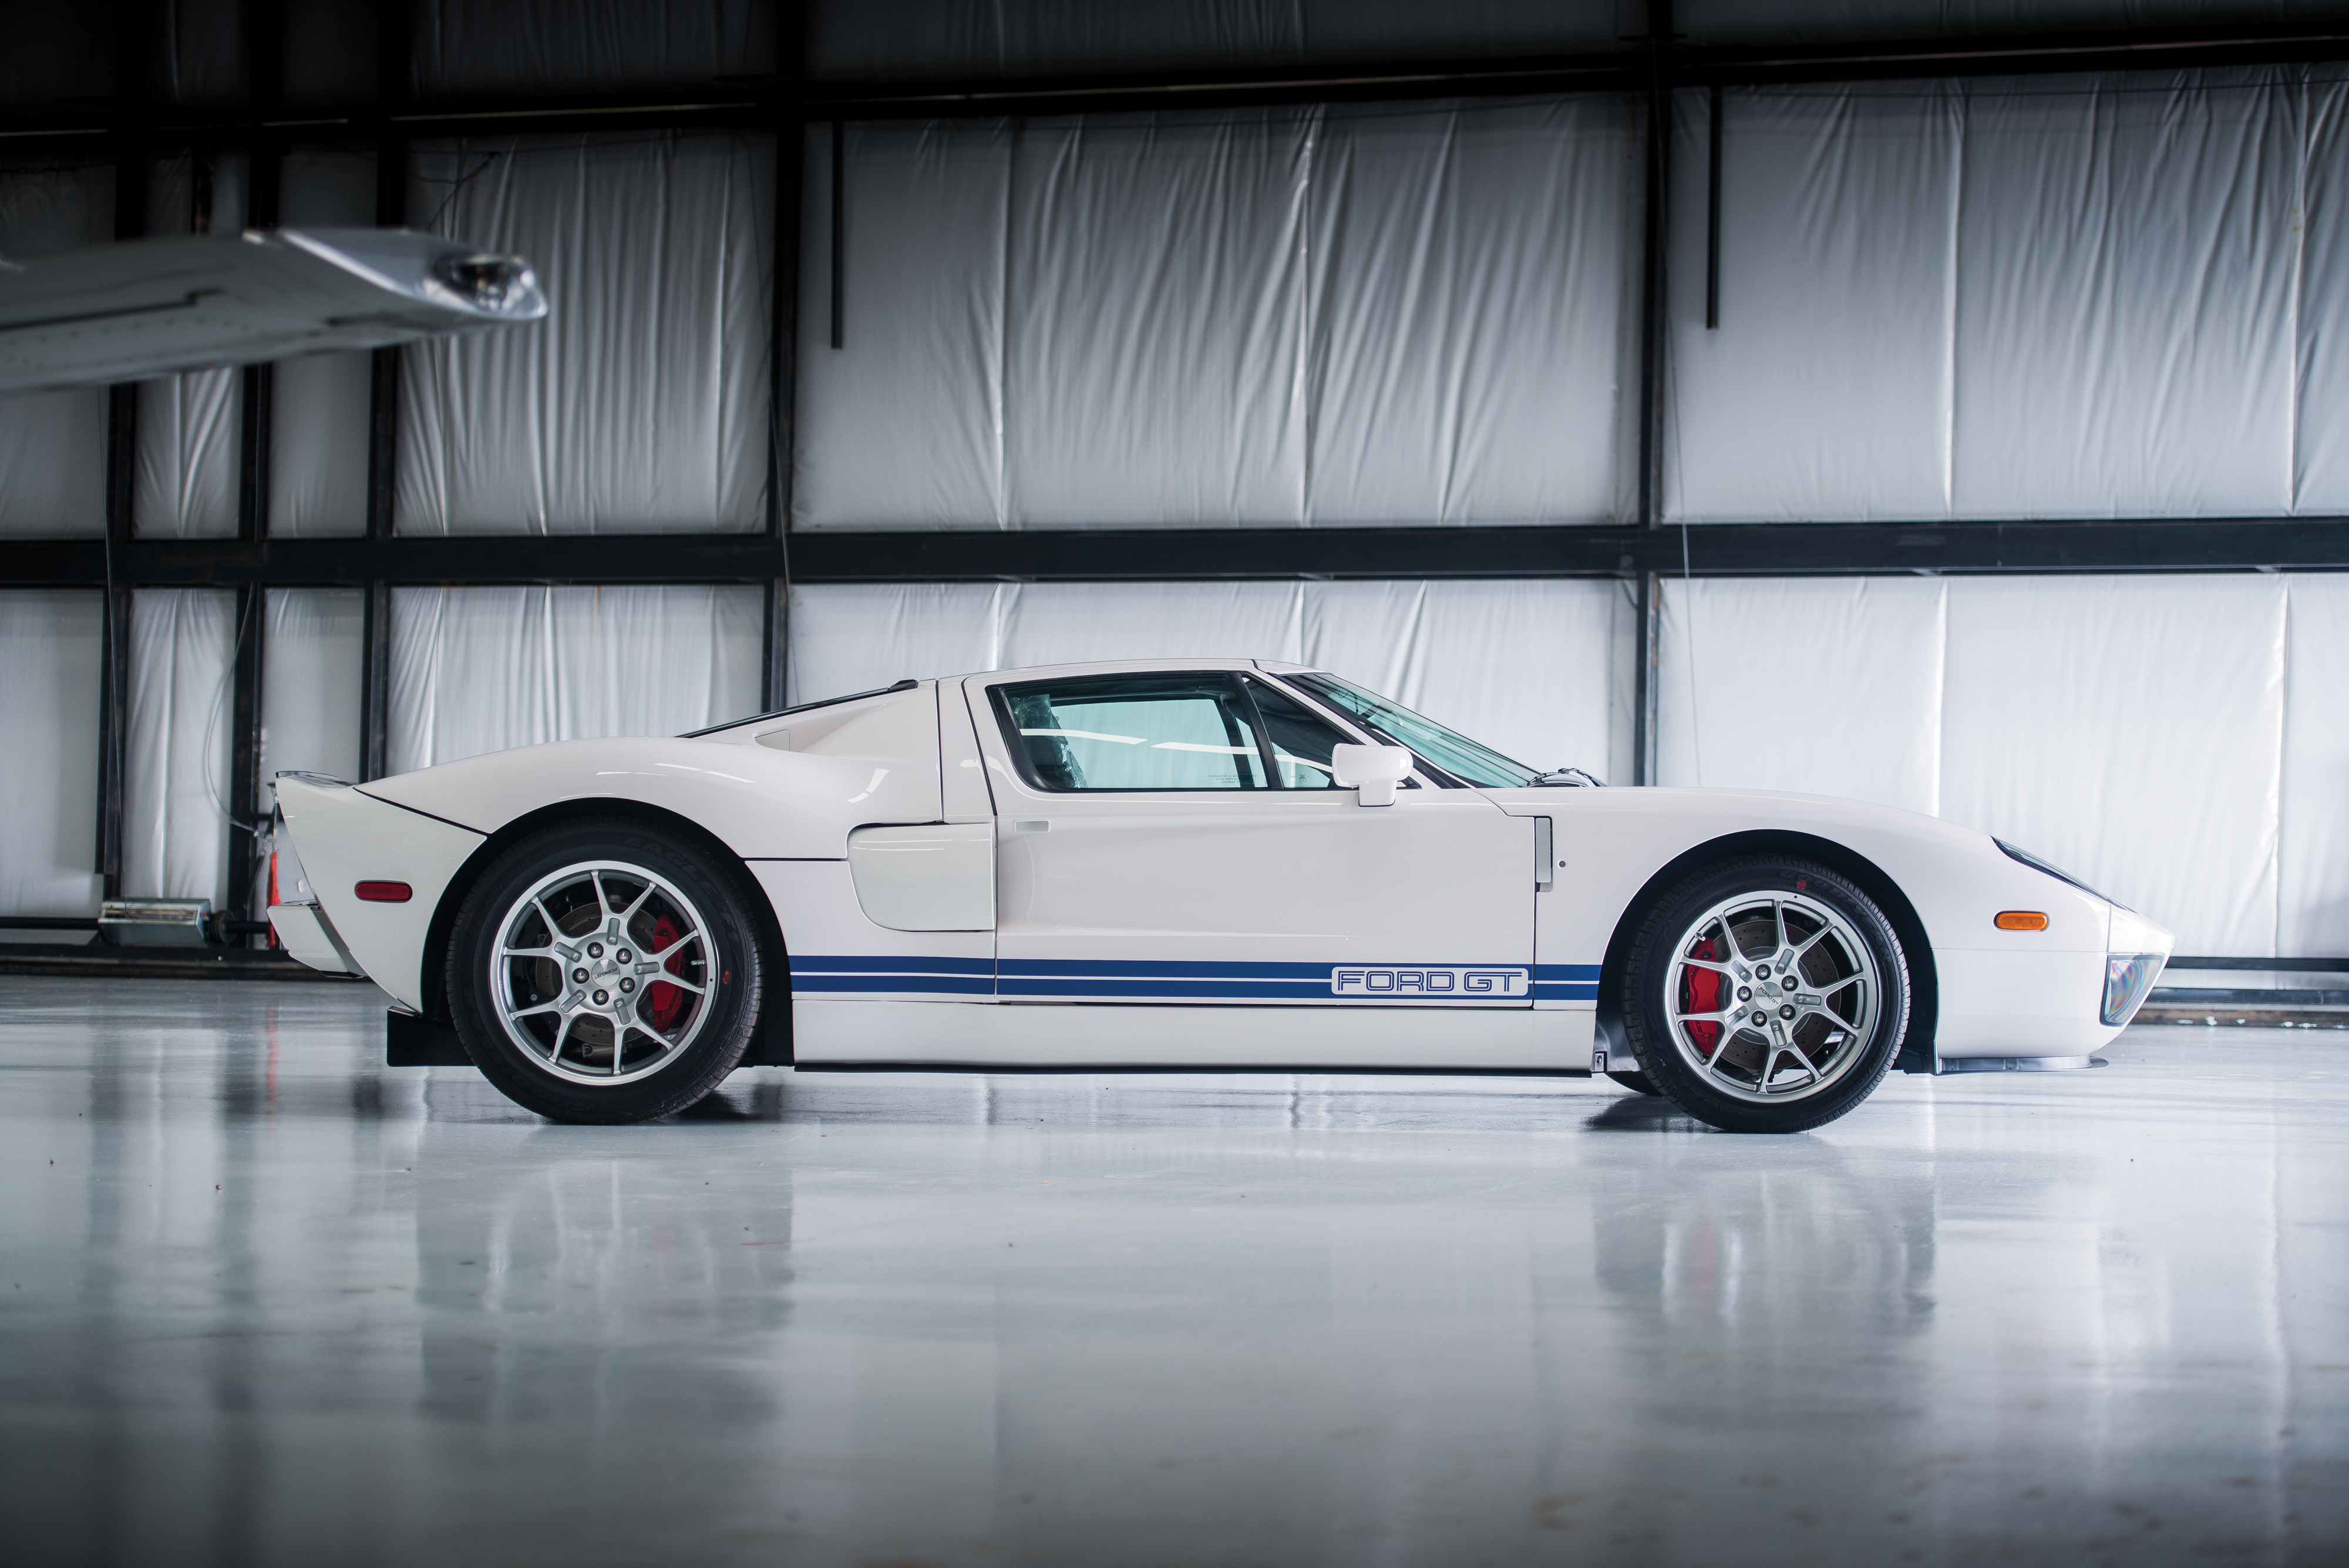 10-mile Ford GT to be offered at RM Sotheby’s Fort Lauderdale sale